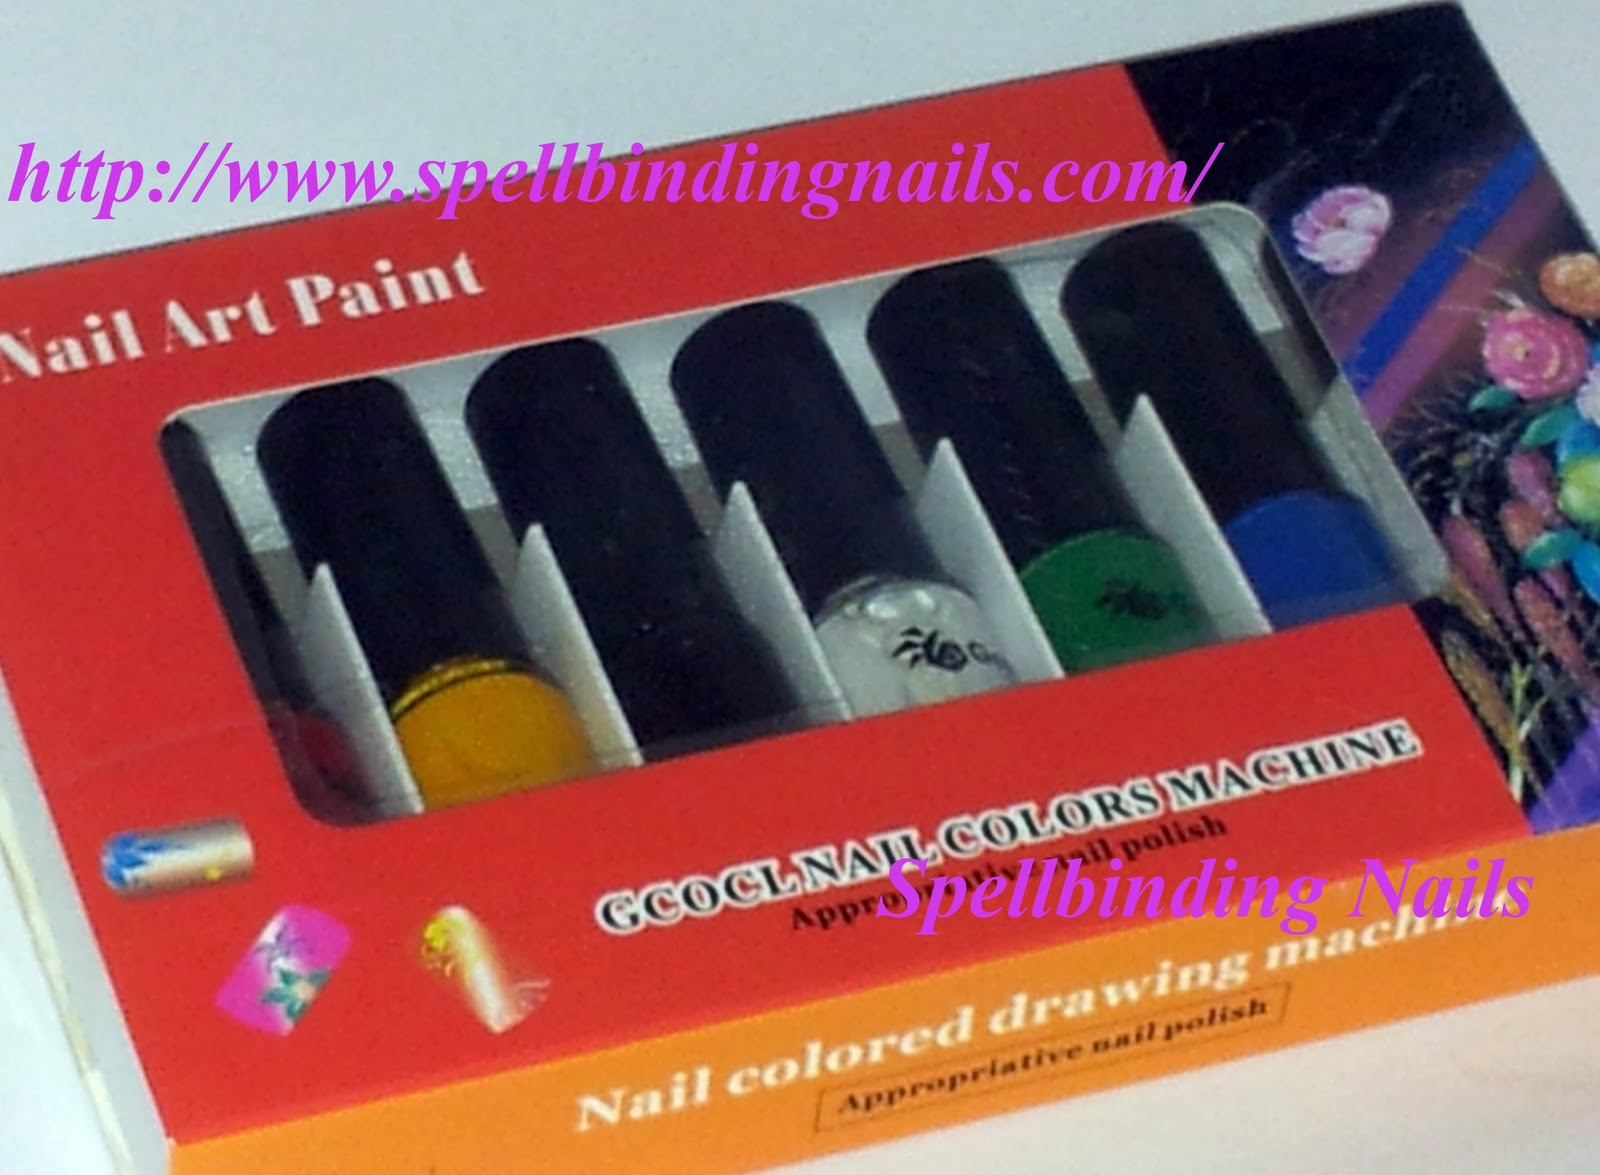 Here is the Stamp Nail Polish for Nail Art Printing Color Machine Set they